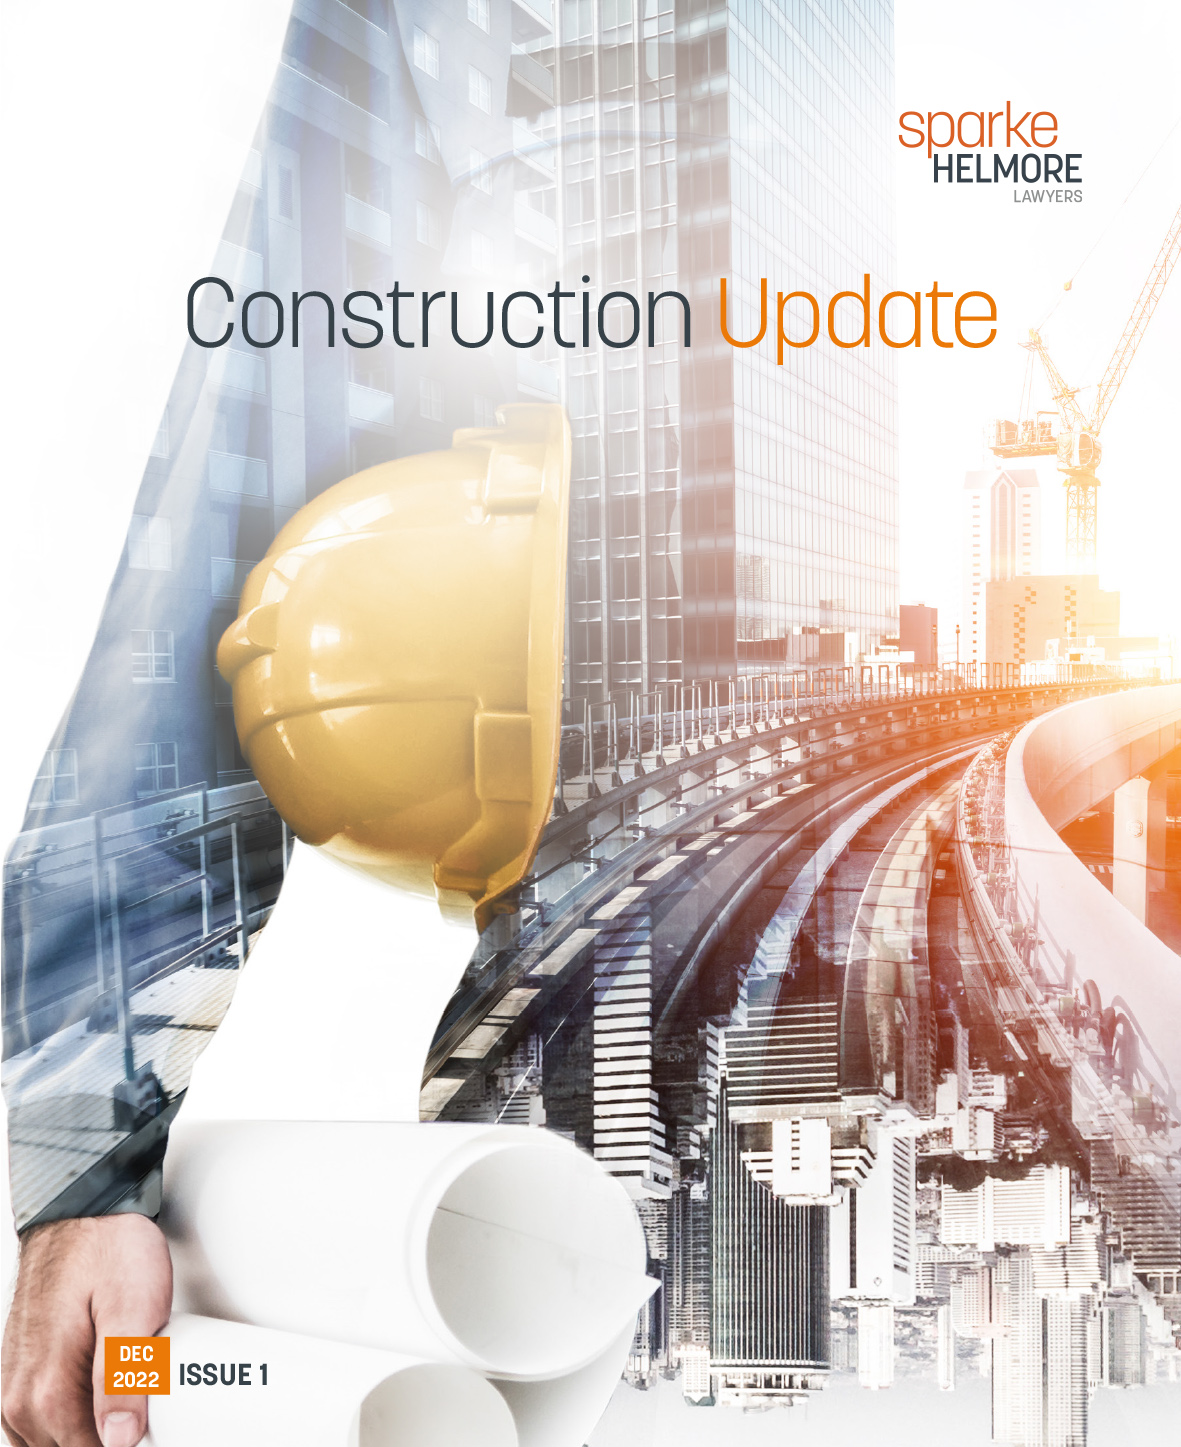 Sparke Helmore 2022 Construction Update - click to download PDF